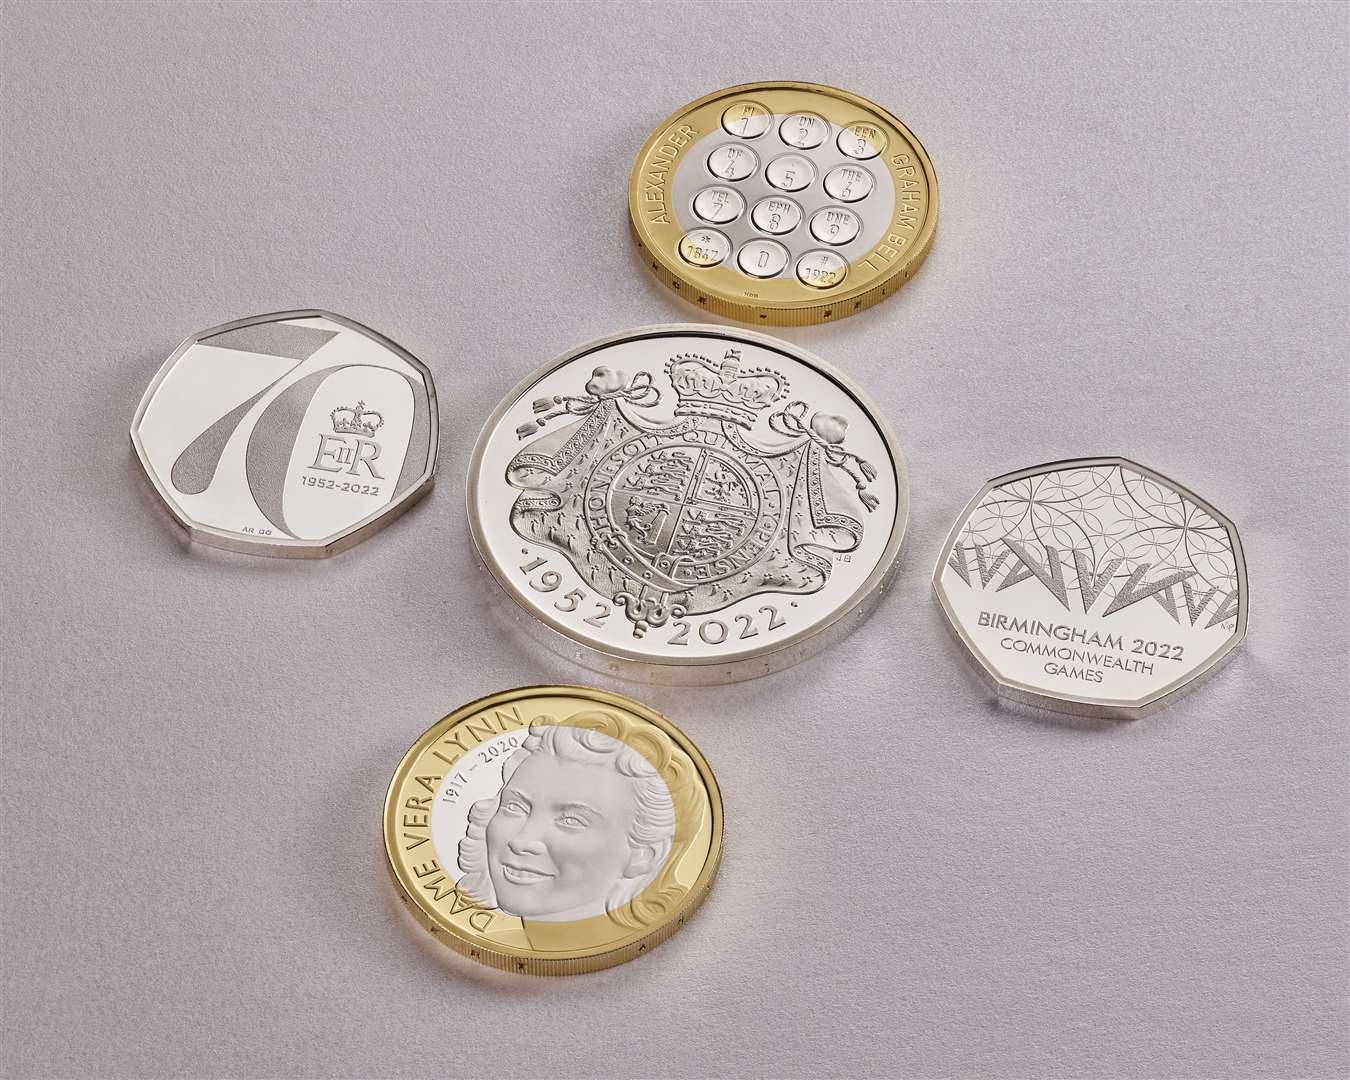 The Royal Mint is releasing a series of new coins available to buy from today